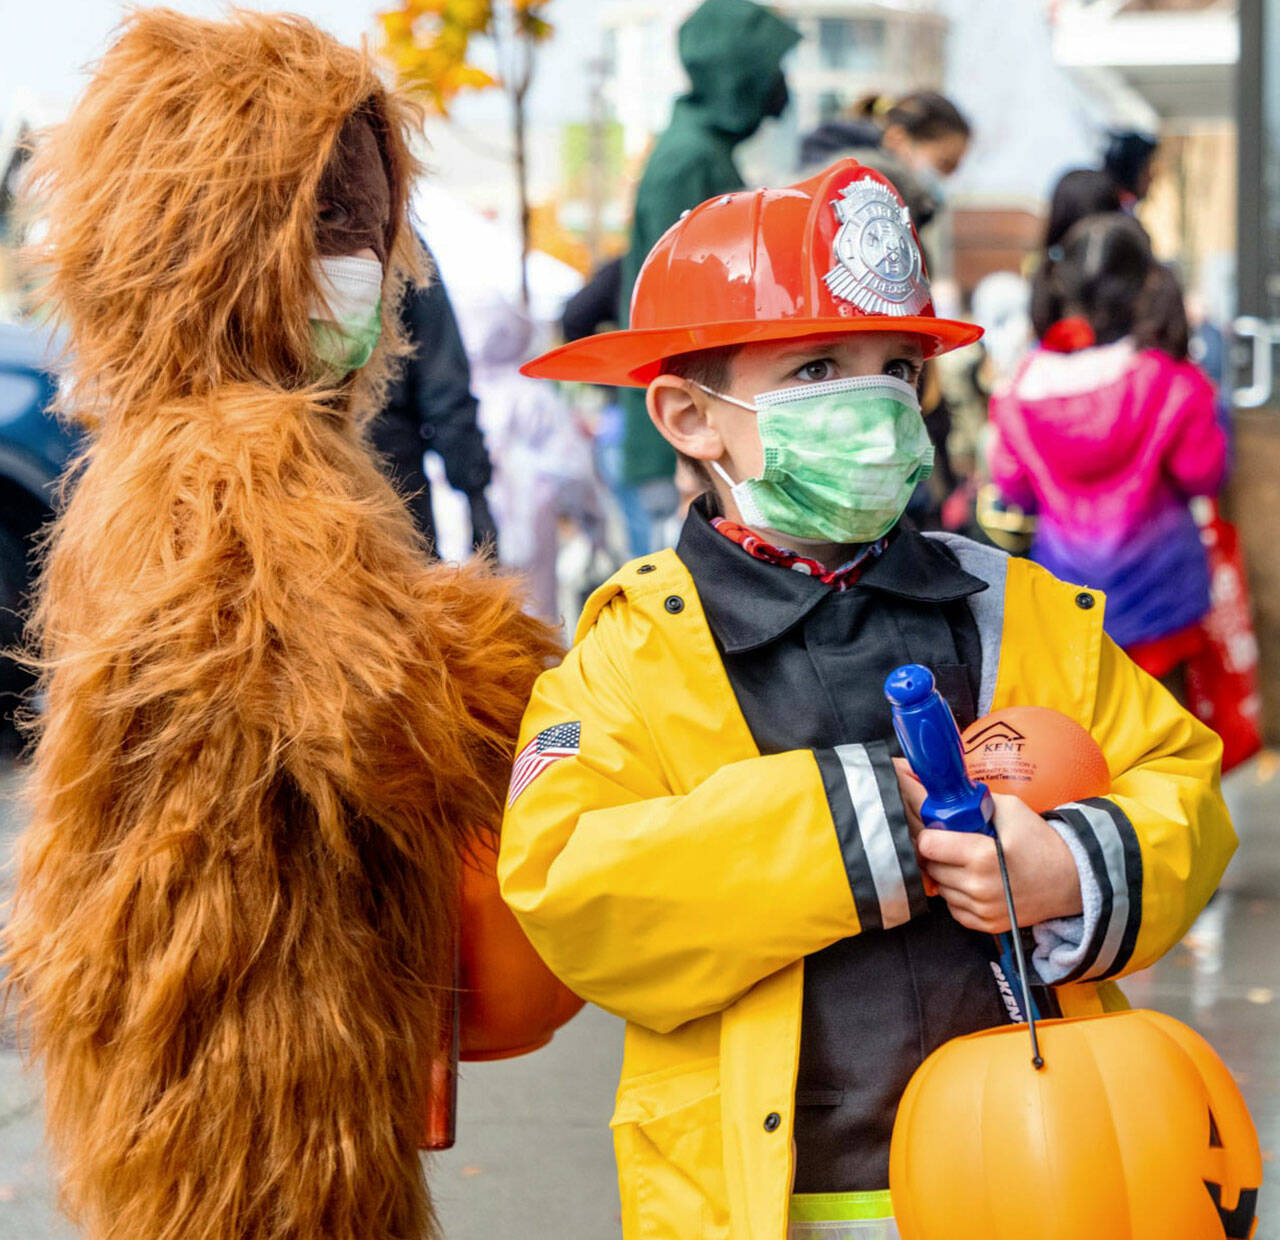 Kids tour the Haunted Boo-Levard at Kent Station on Oct. 24. COURTESY PHOTO, City of Kent